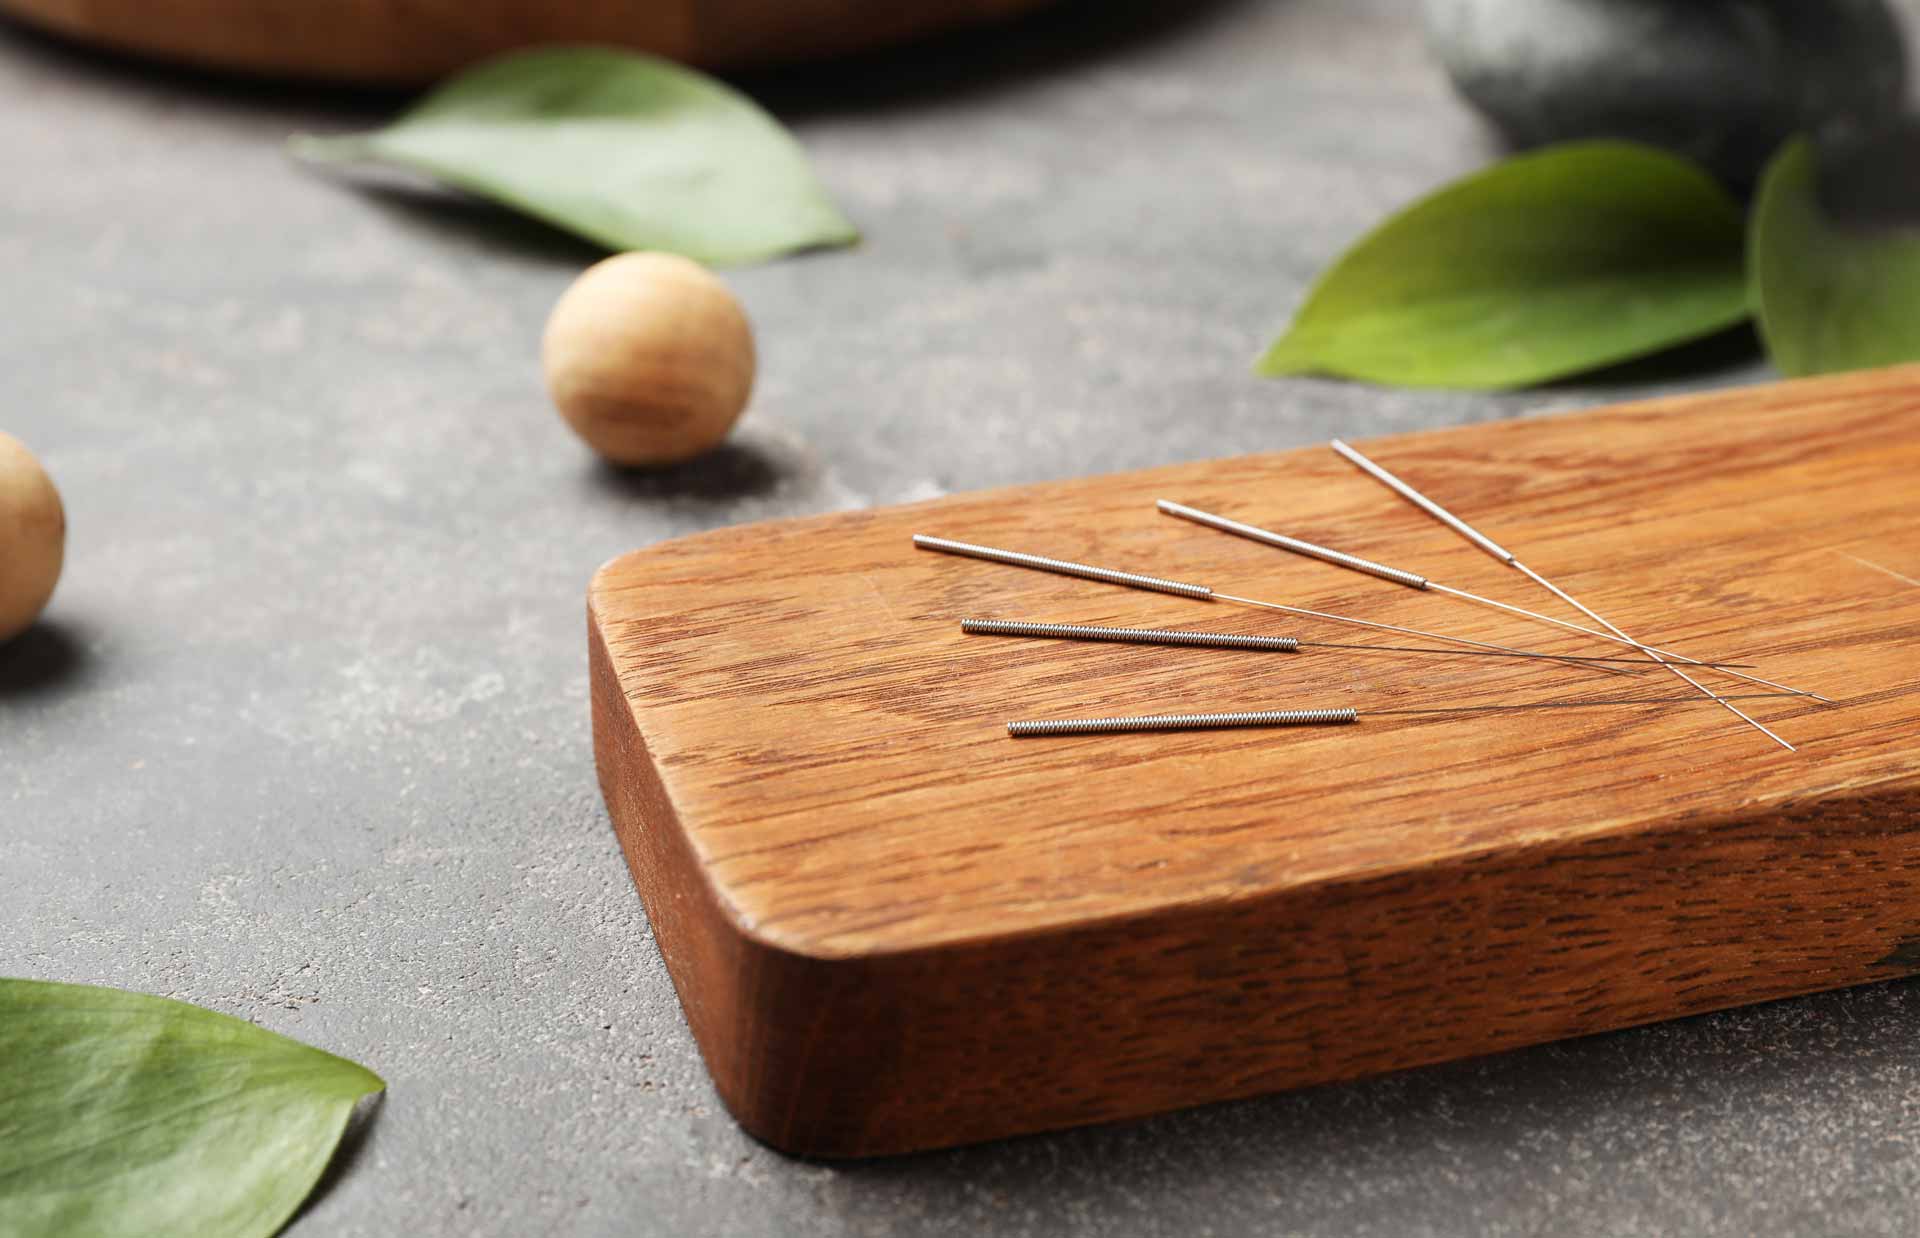 Acupuncture needles on wooden tray